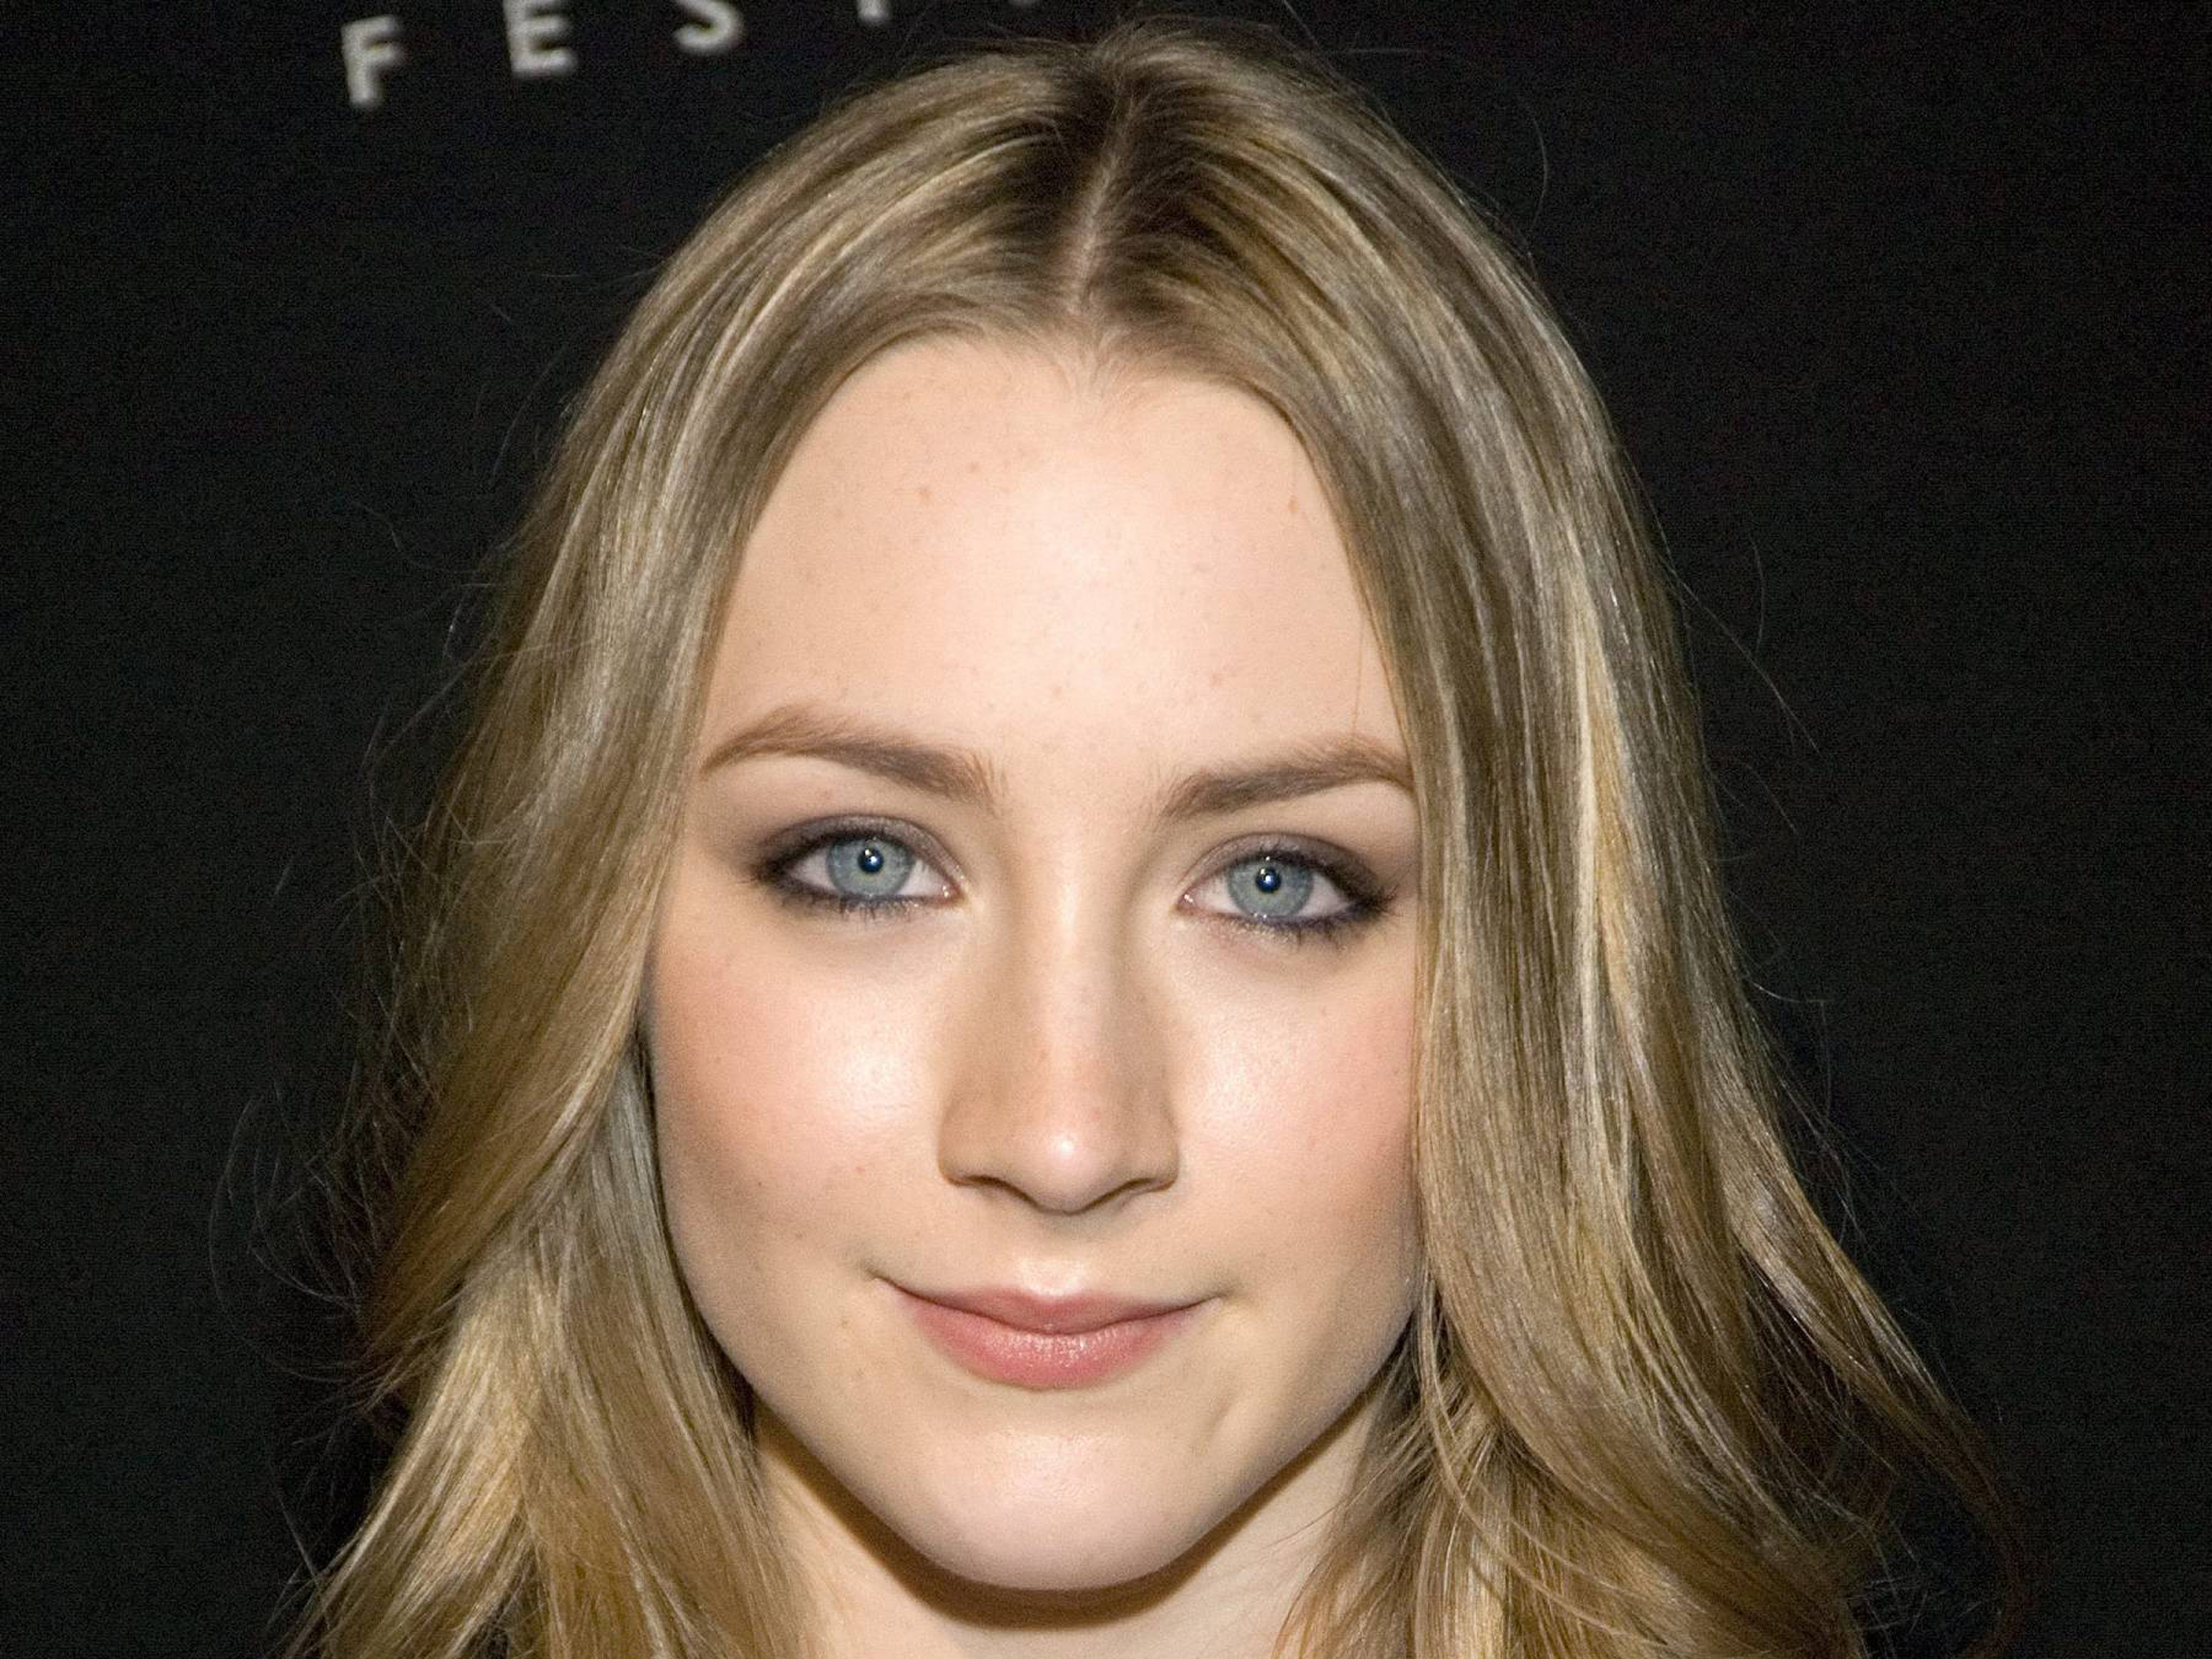 To download the Saoirse Ronan Wallpaper Hot just Right Click on the image and click "Save As". You can use the HD backgrounds theme for desktop and laptop ...